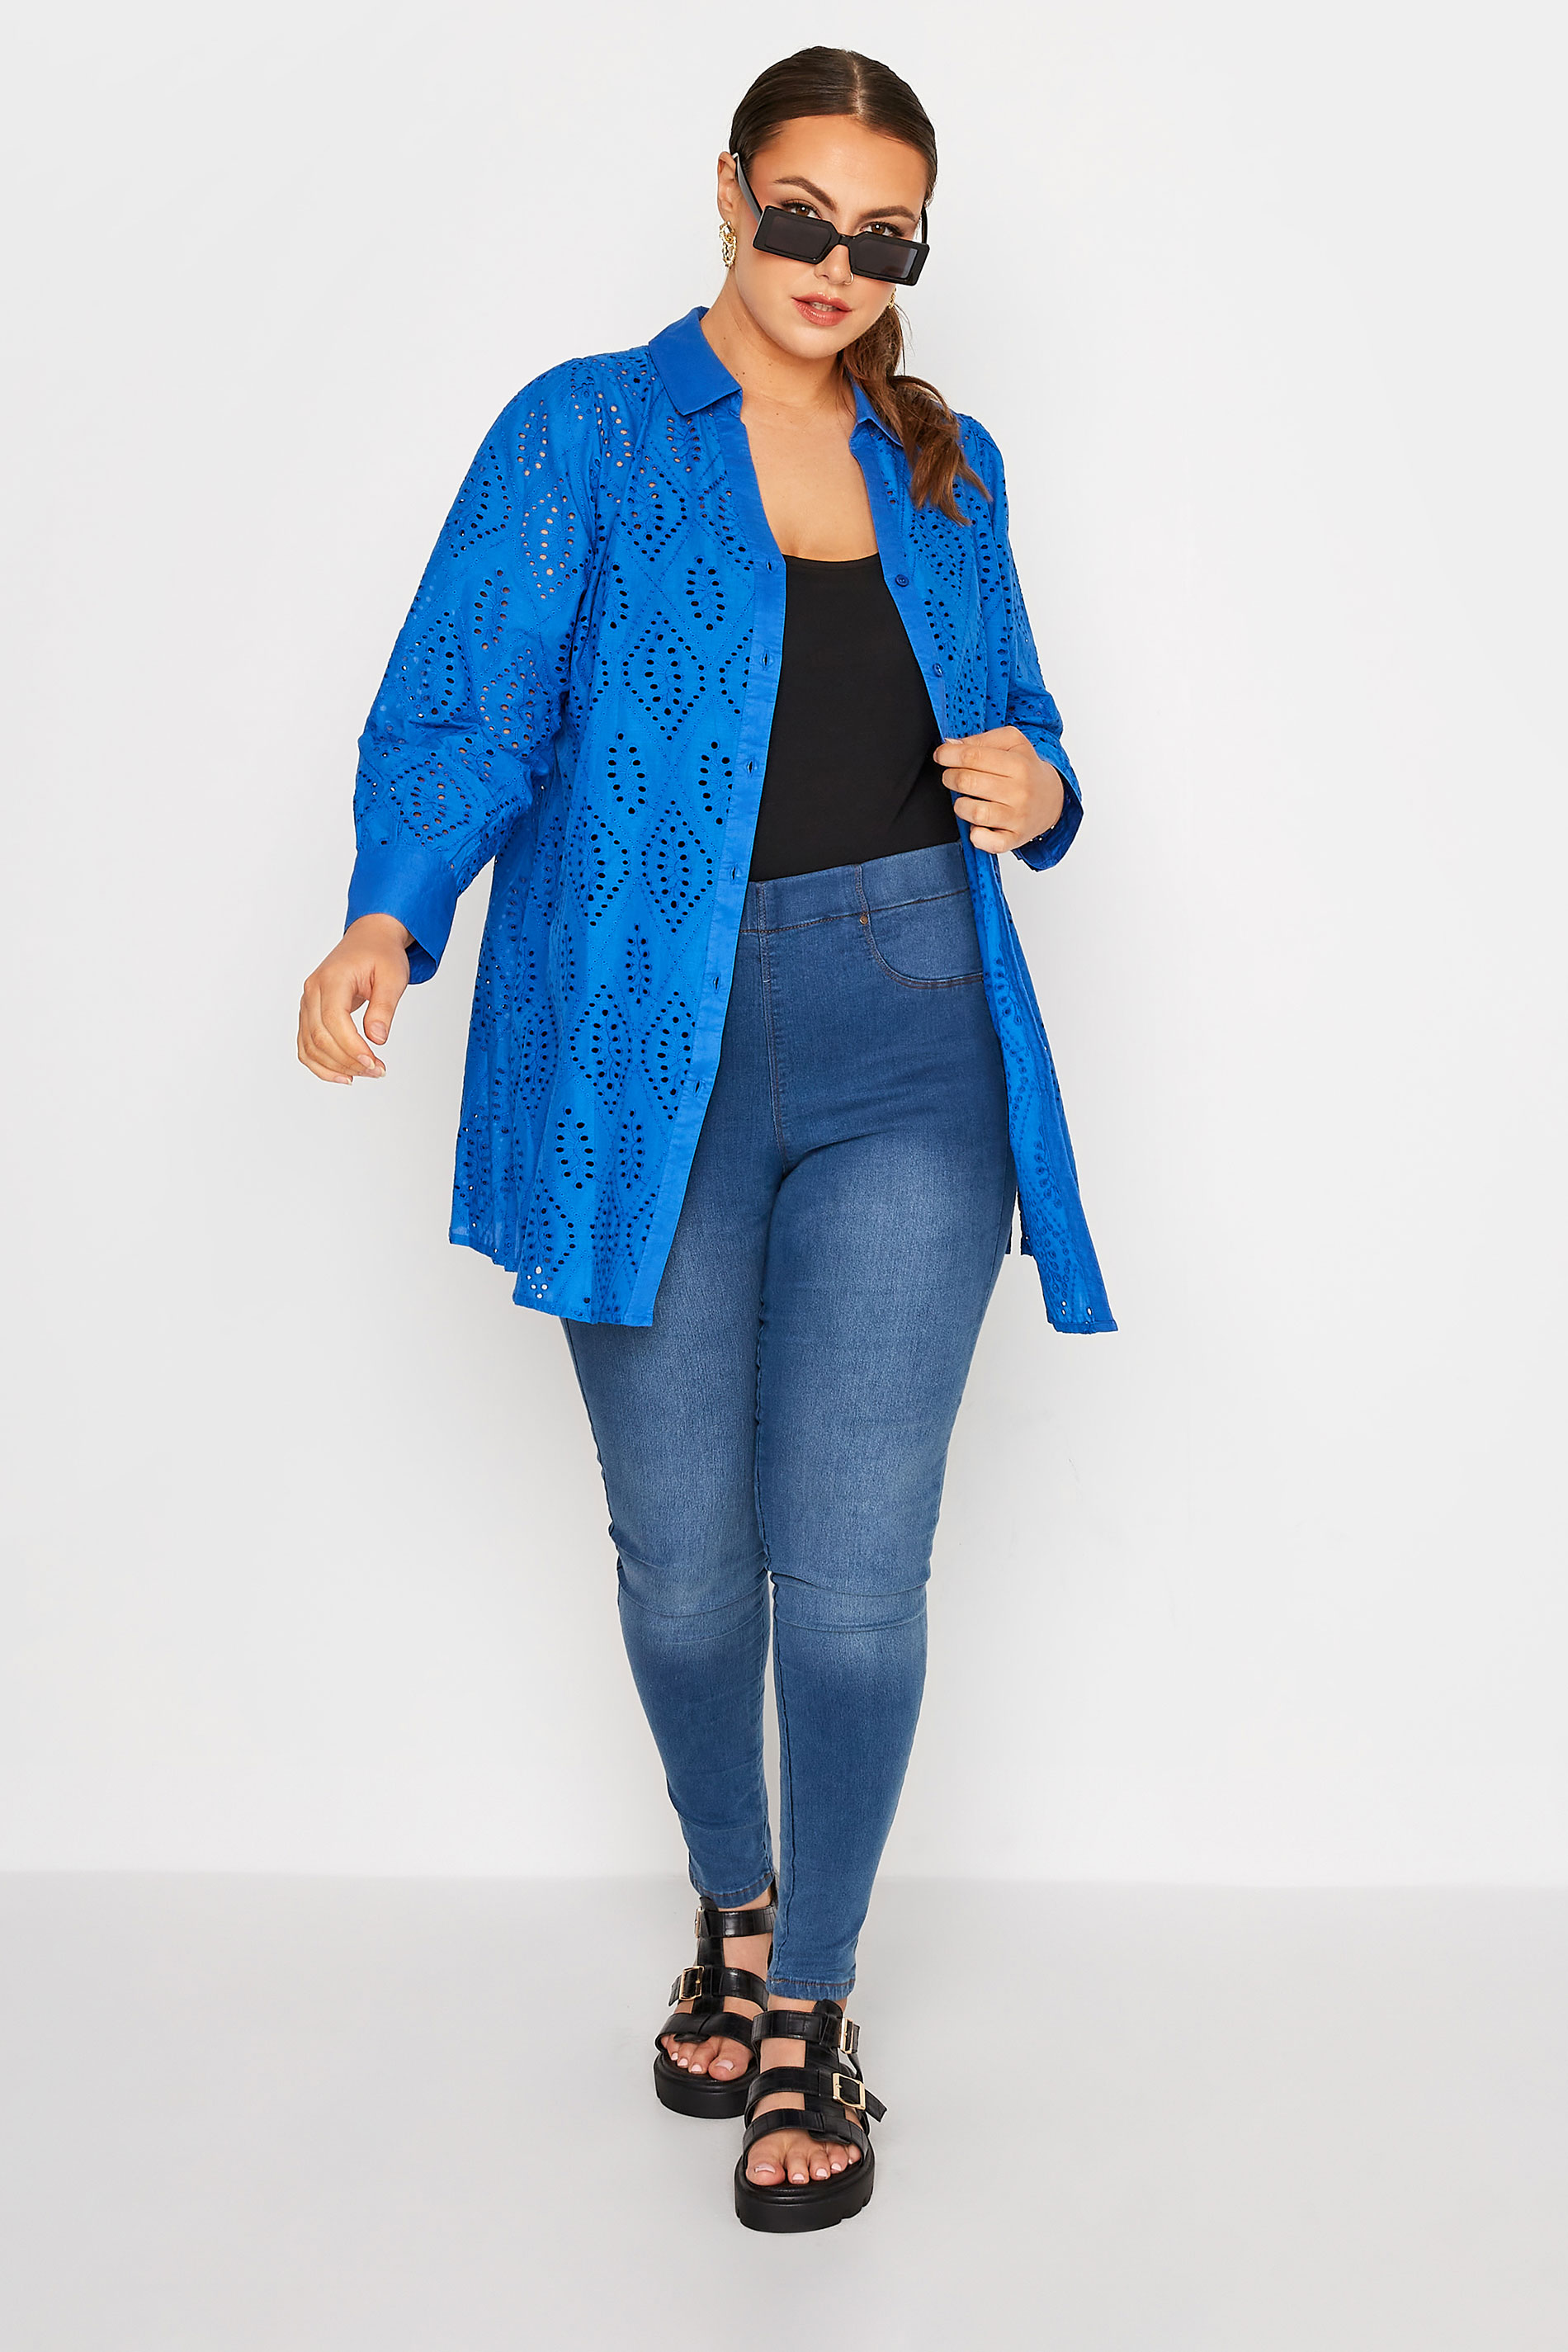 Grande taille  Tops Grande taille  Blouses & Chemisiers | LIMITED COLLECTION - Chemisier Bleu Roi Manches Longues Broderie Anglaise - MI62926